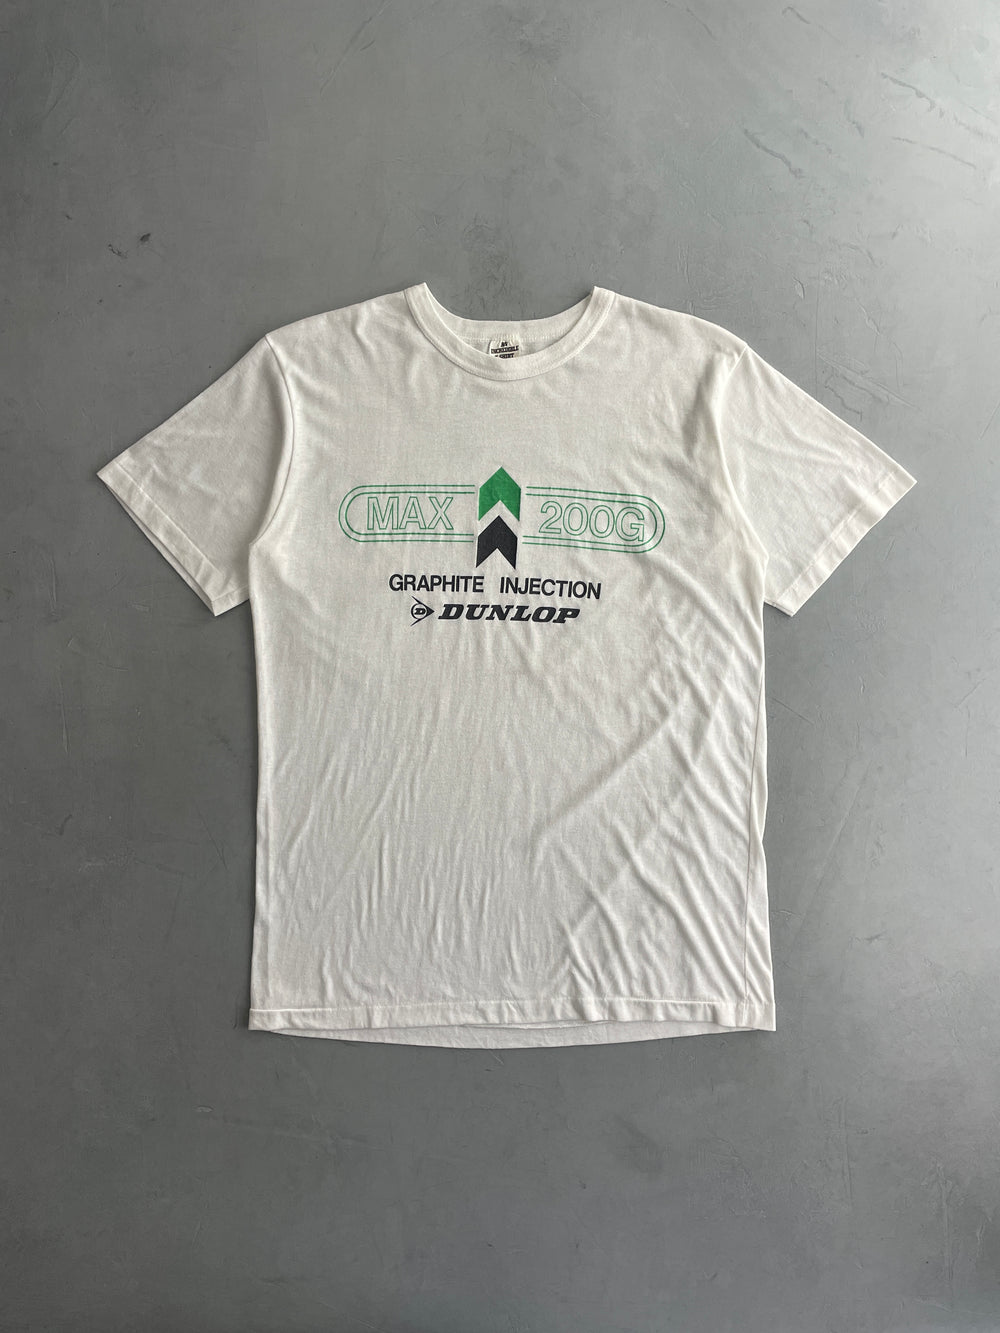 80's Dunlop Graphic Injection Tee [XL]